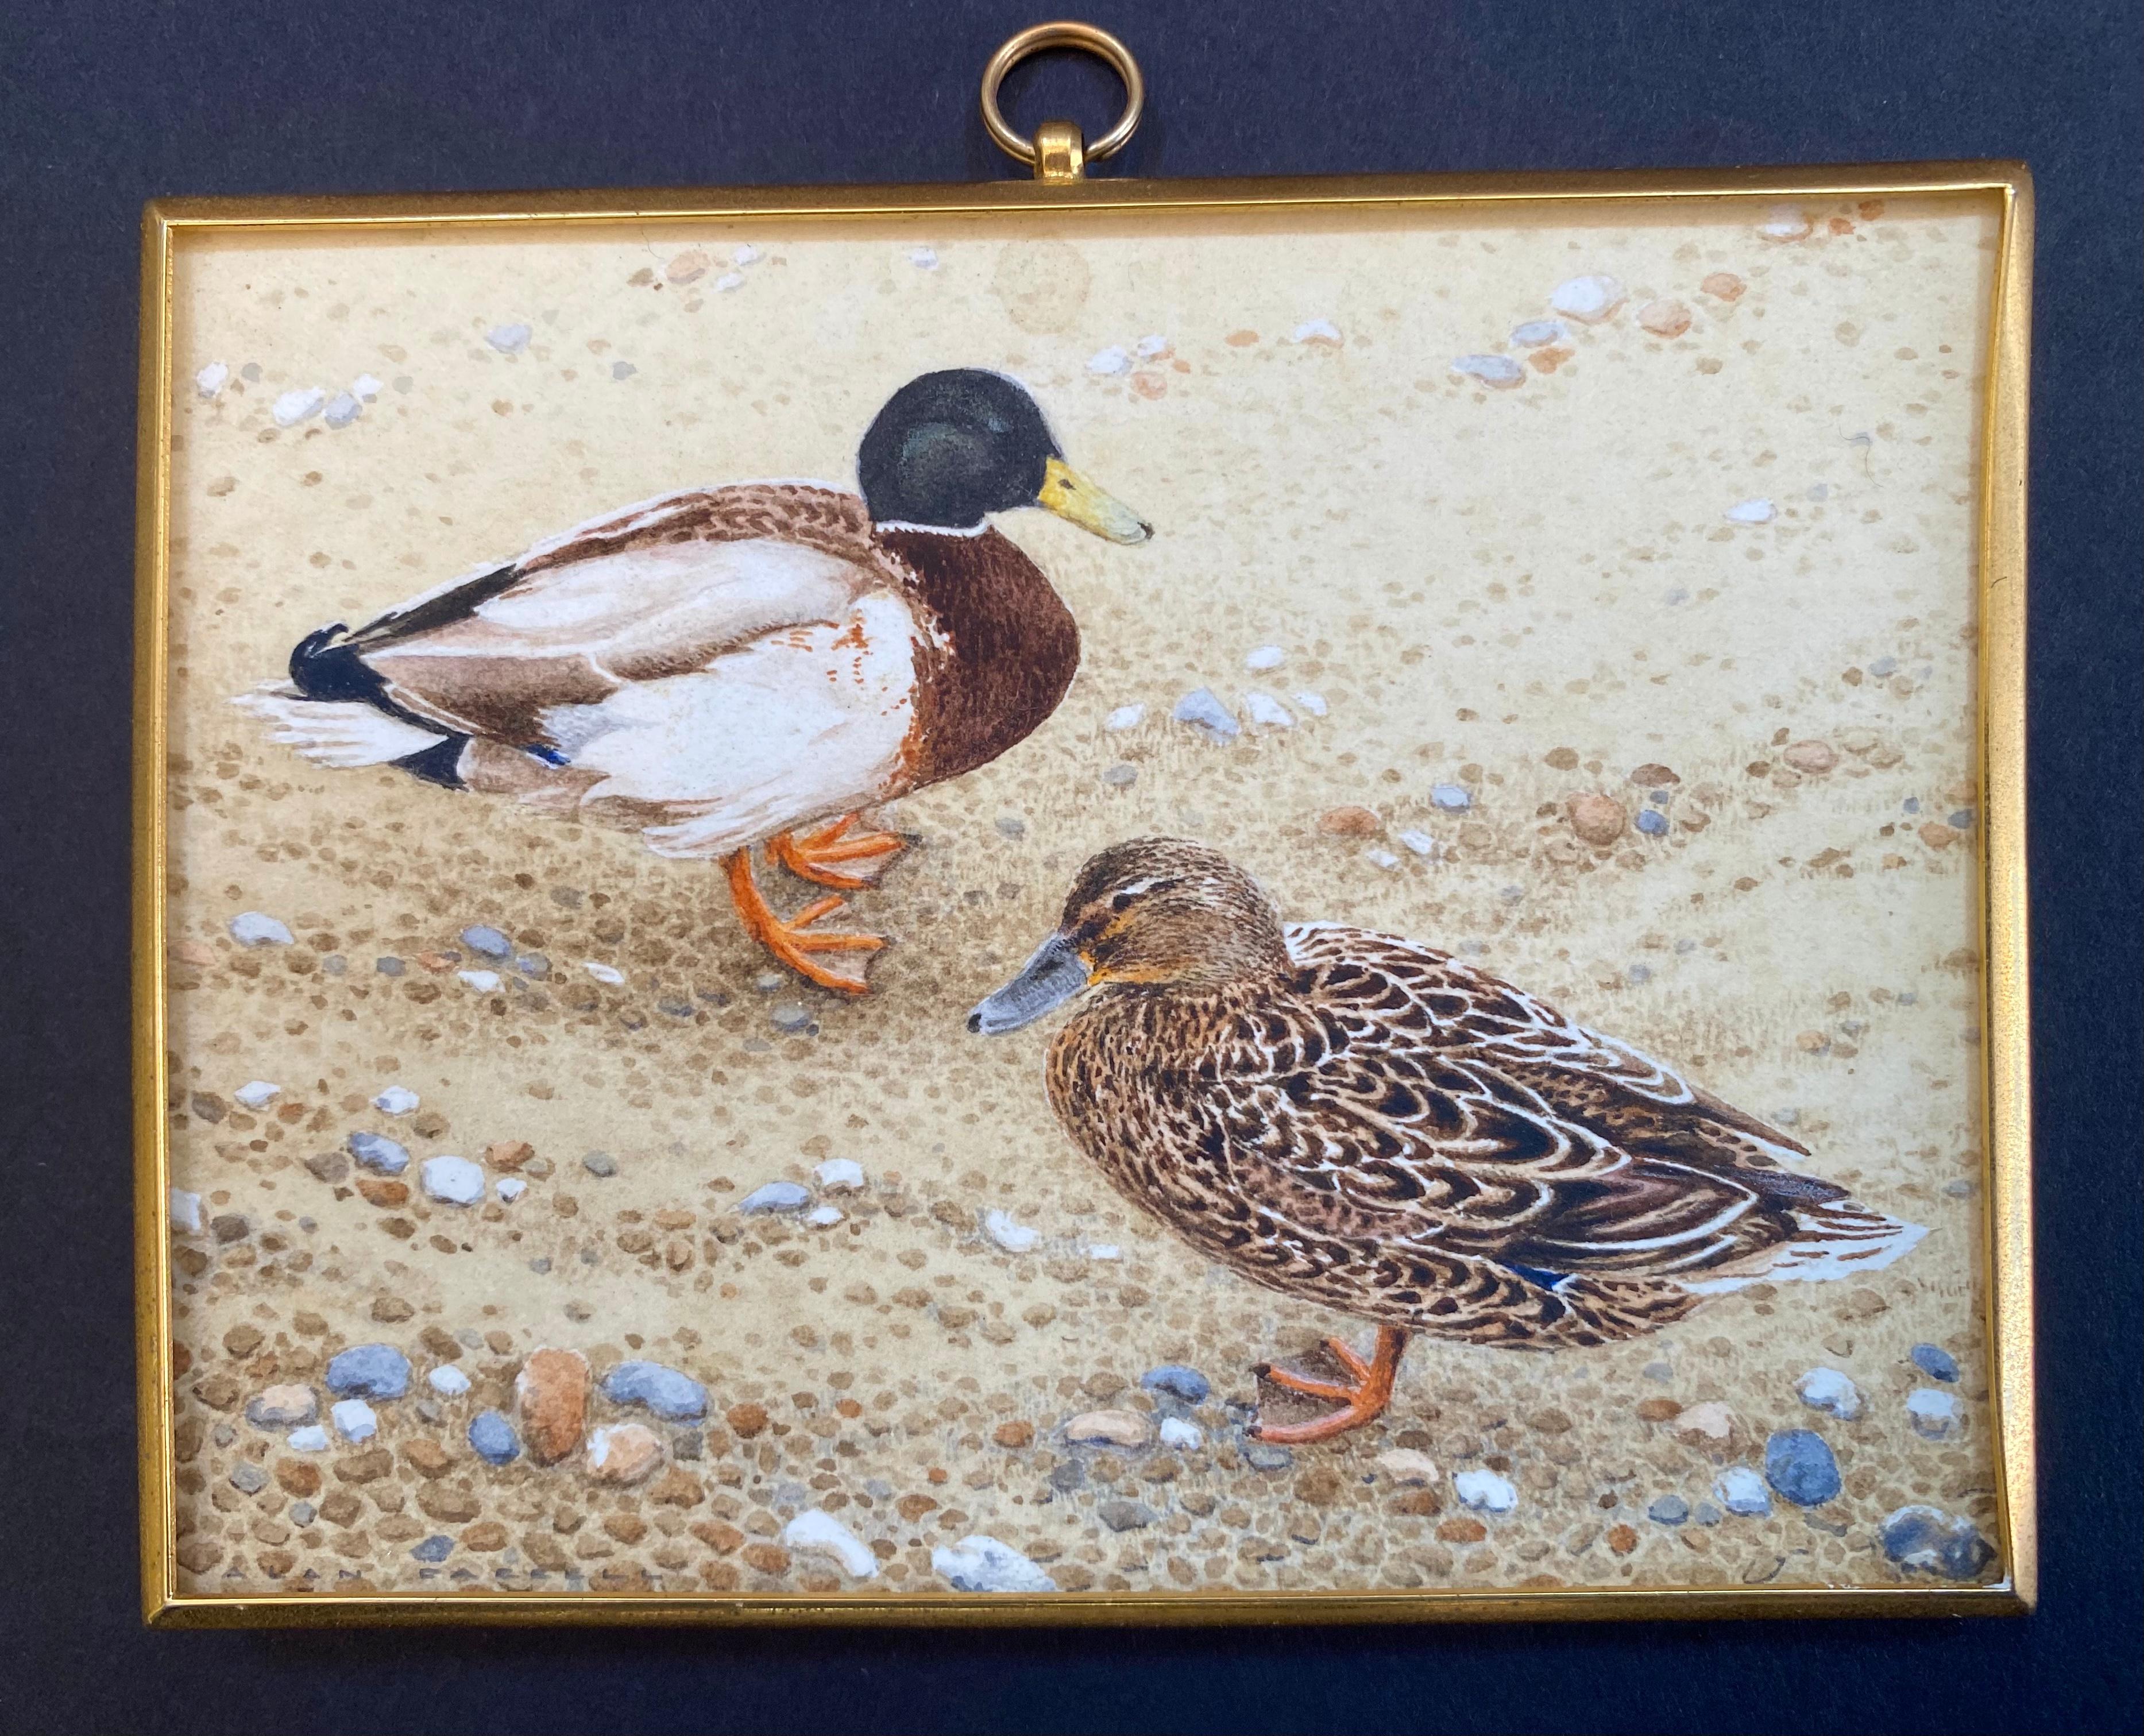 Miniature watercolor painting on arches paper of a pair of mallards done by the very well known miniature artist, Allan Farrell. Exhibited at the Royal Miniature Society exhibition in 2002. Label verso. Signed lower left. Condition: excellent.